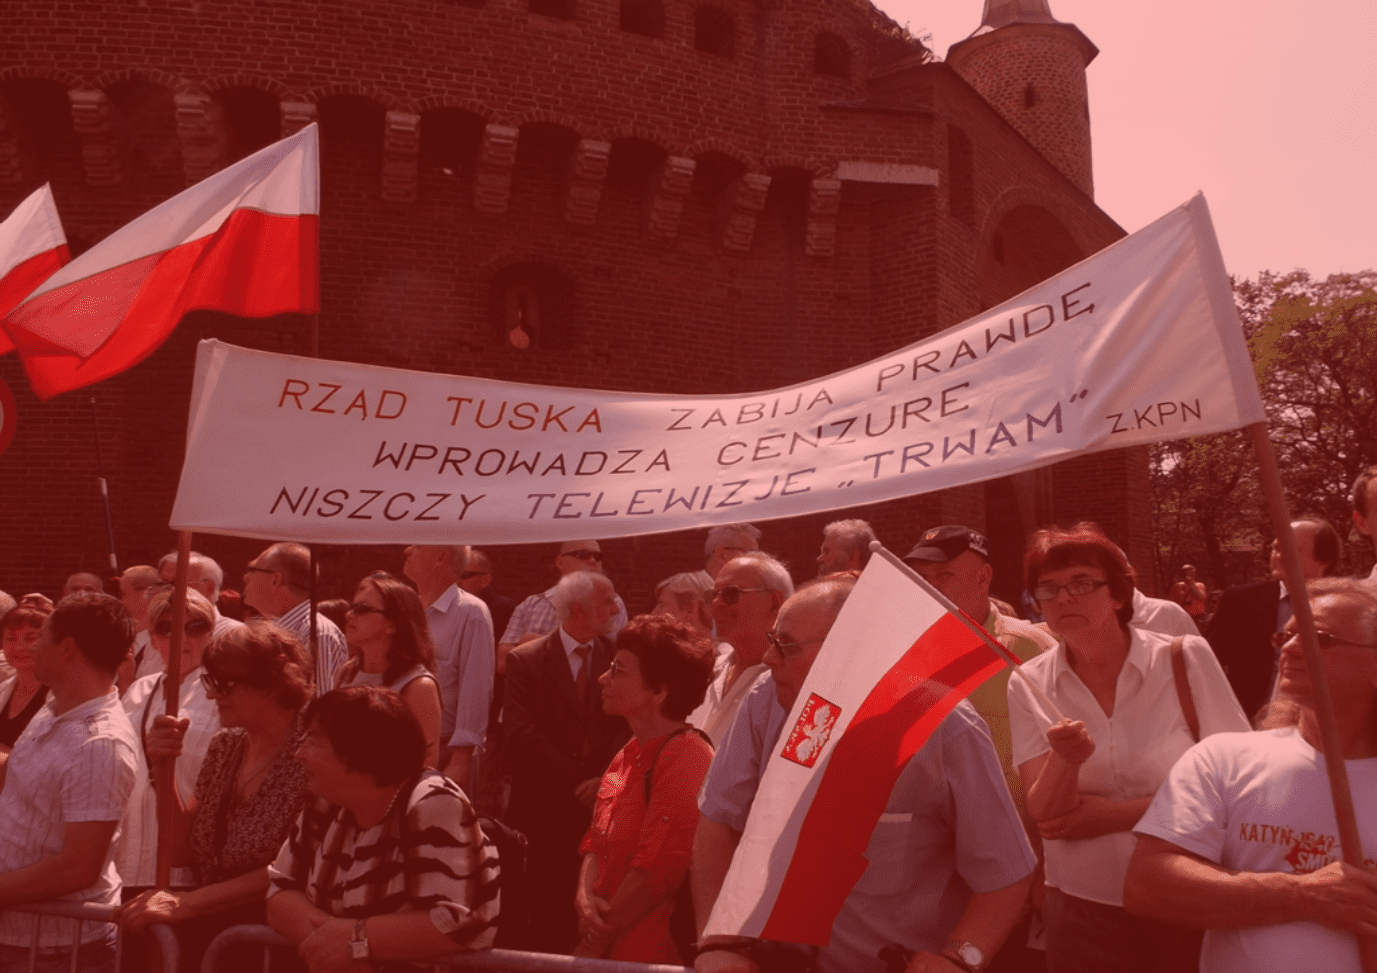 Arkadiusz Lewandowski and Marcin Polakowski – Post-Communist Populism in Poland: The Case of the Law and Justice Party